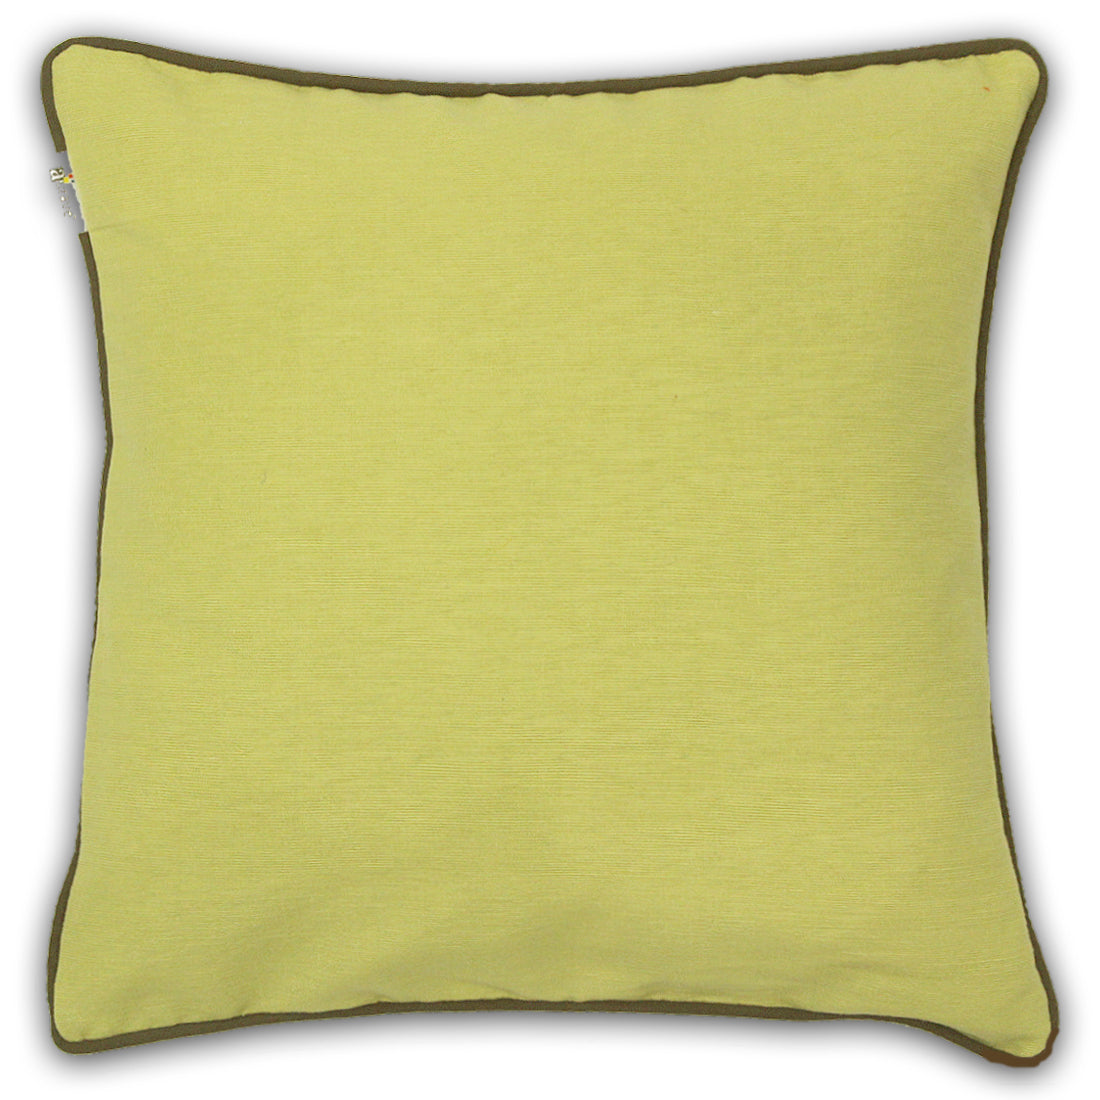 Soft Woven Corded Stripe Cotton Cushion Cover Set in Olive Green online (1Pc)